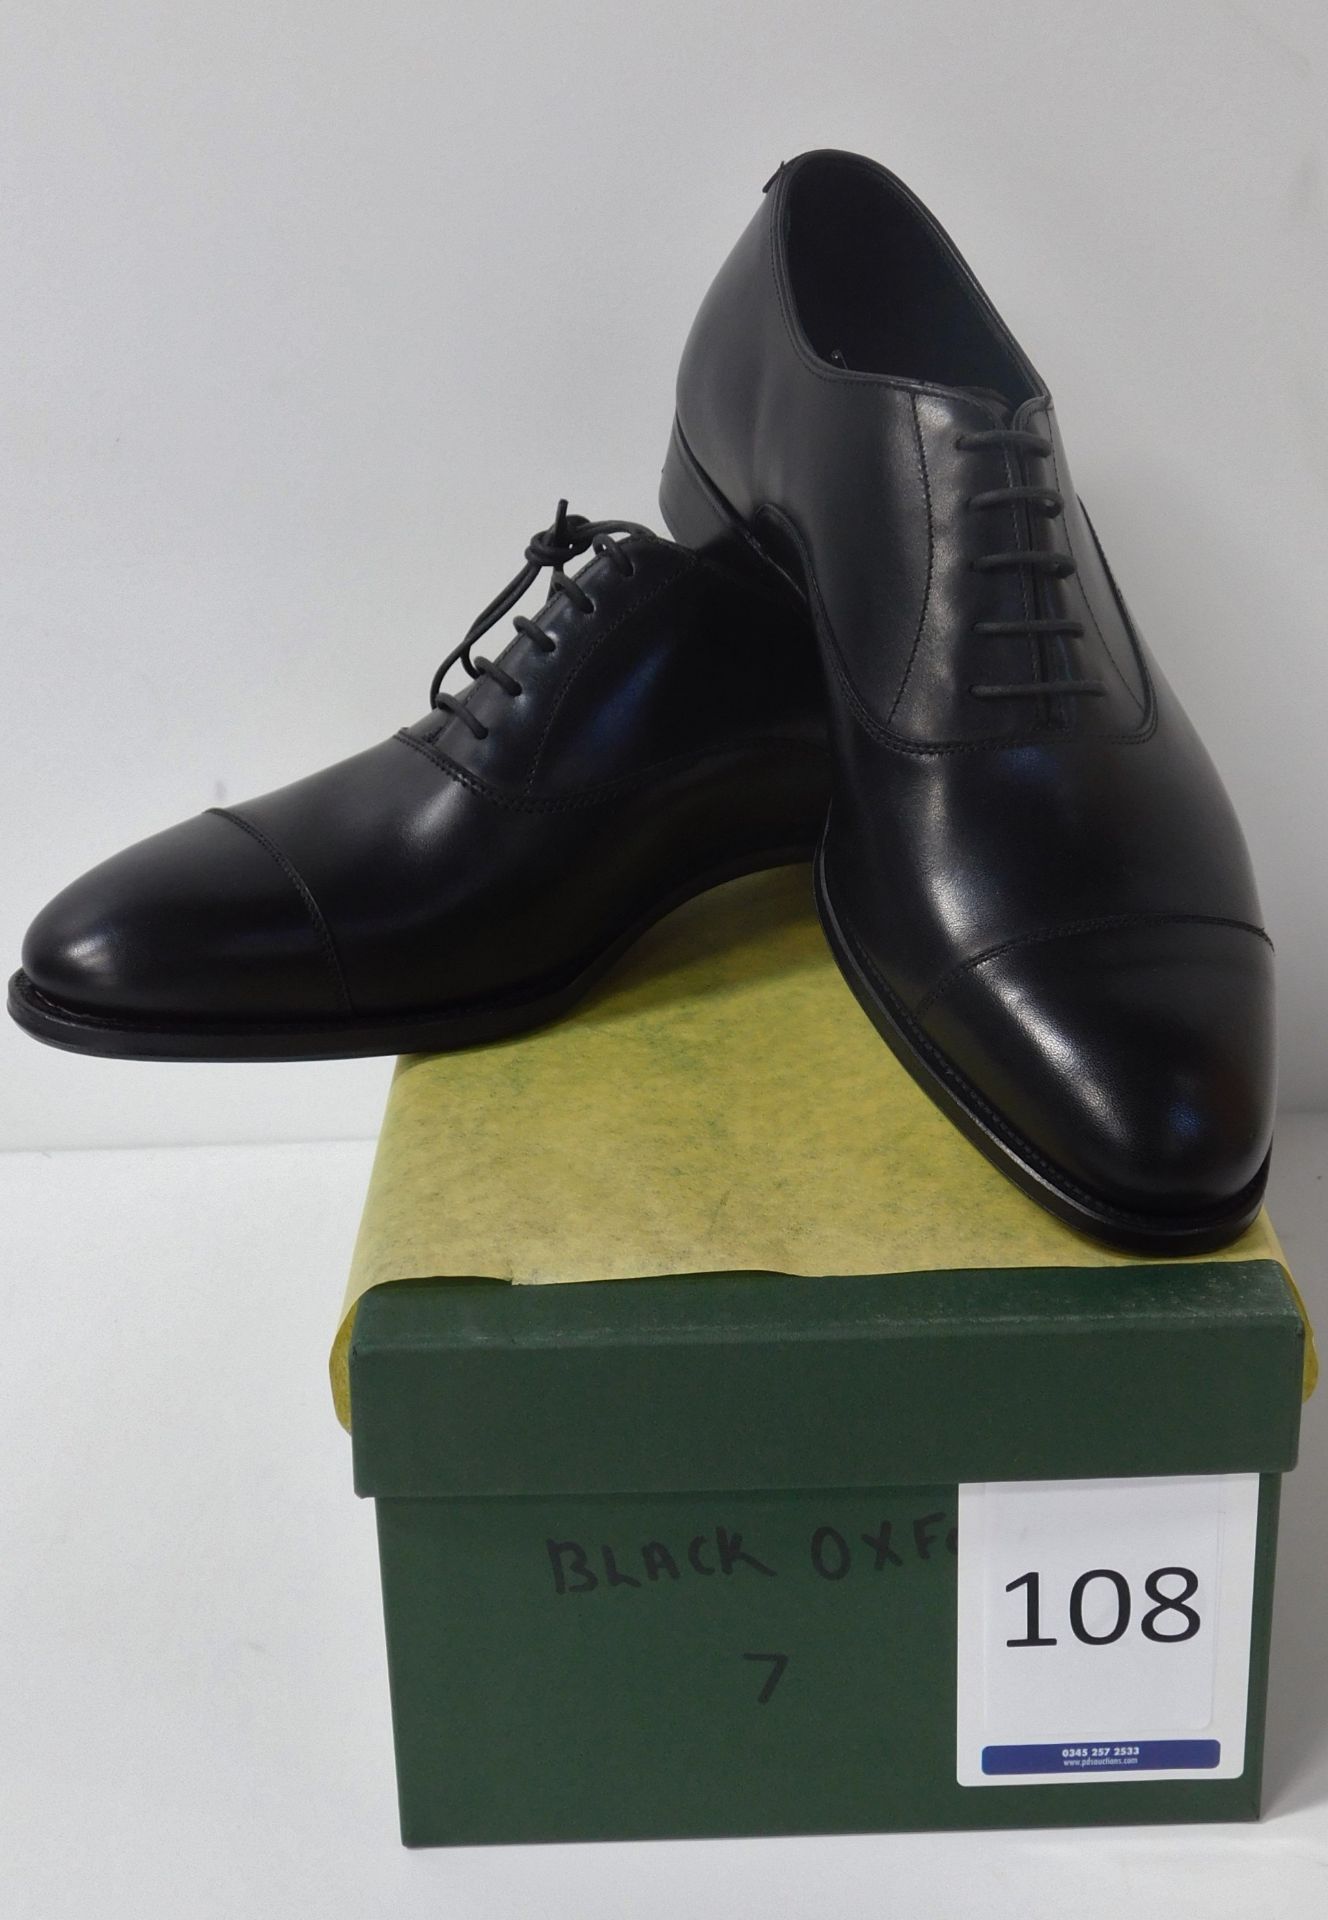 Pair of Alfred Sargent Black Oxford, Size 7 (Slight Seconds) (Location: Brentwood - See General